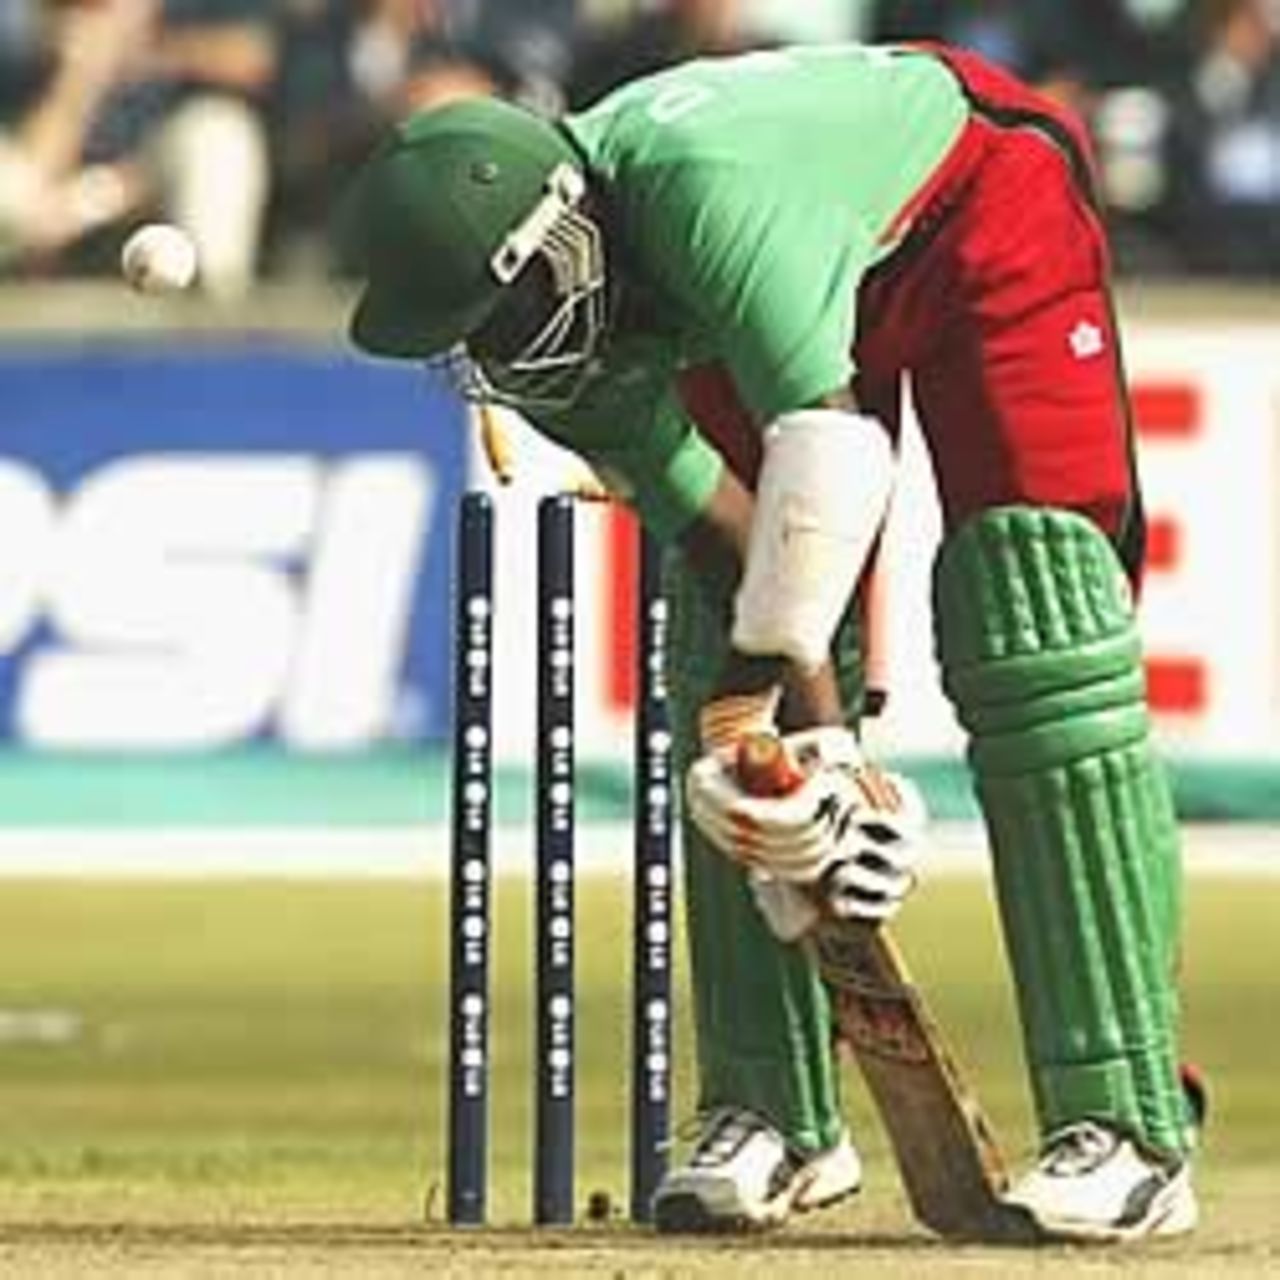 DURBAN- MARCH 15: David Obuya of Kenya is bowled by Brett Lee of Australia to complete a hat trick, the first wicket of a hat trick during the World Cup Super Six One Day International between Australia and Kenya played at Kingsmead, Durban, South Africa, on March 15, 2003.